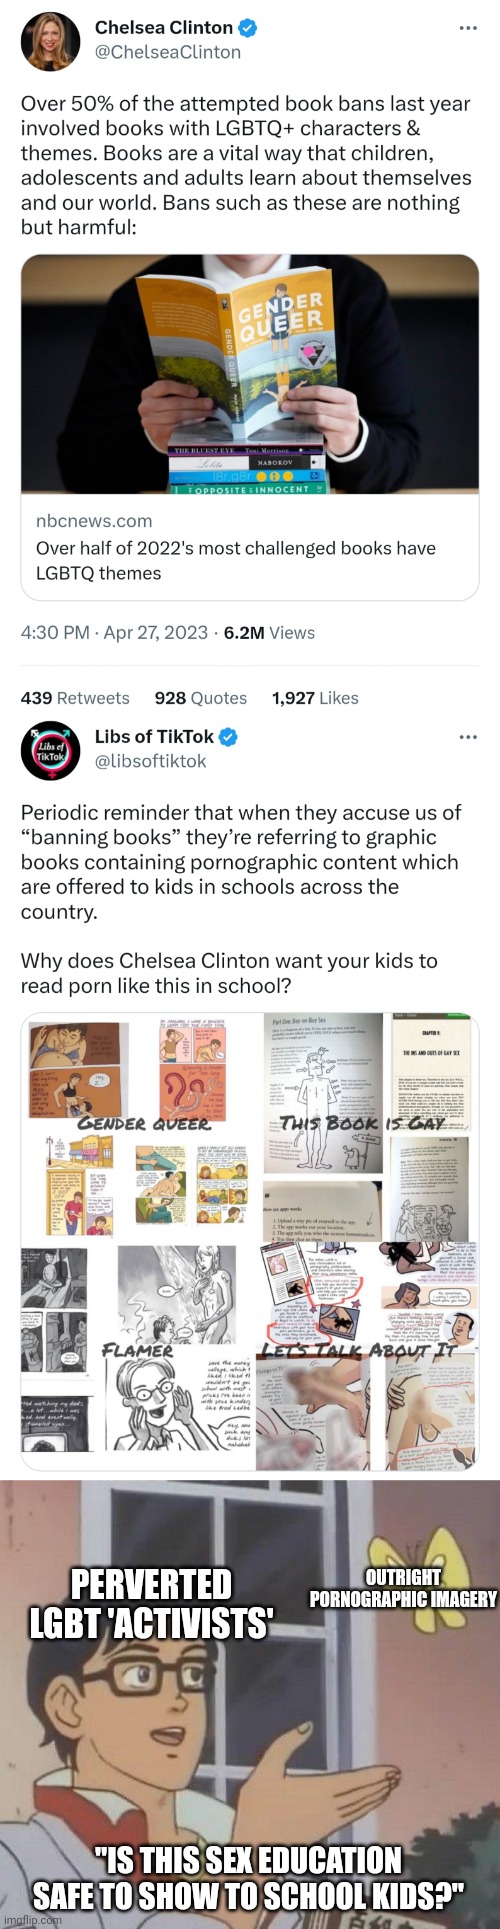 Chelsea Clinton is sick minded enough to think it's ok to show porn to school children | OUTRIGHT PORNOGRAPHIC IMAGERY; PERVERTED LGBT 'ACTIVISTS'; "IS THIS SEX EDUCATION SAFE TO SHOW TO SCHOOL KIDS?" | image tagged in memes,is this a pigeon,clinton corruption,liberal logic,lgbtq,groomers | made w/ Imgflip meme maker